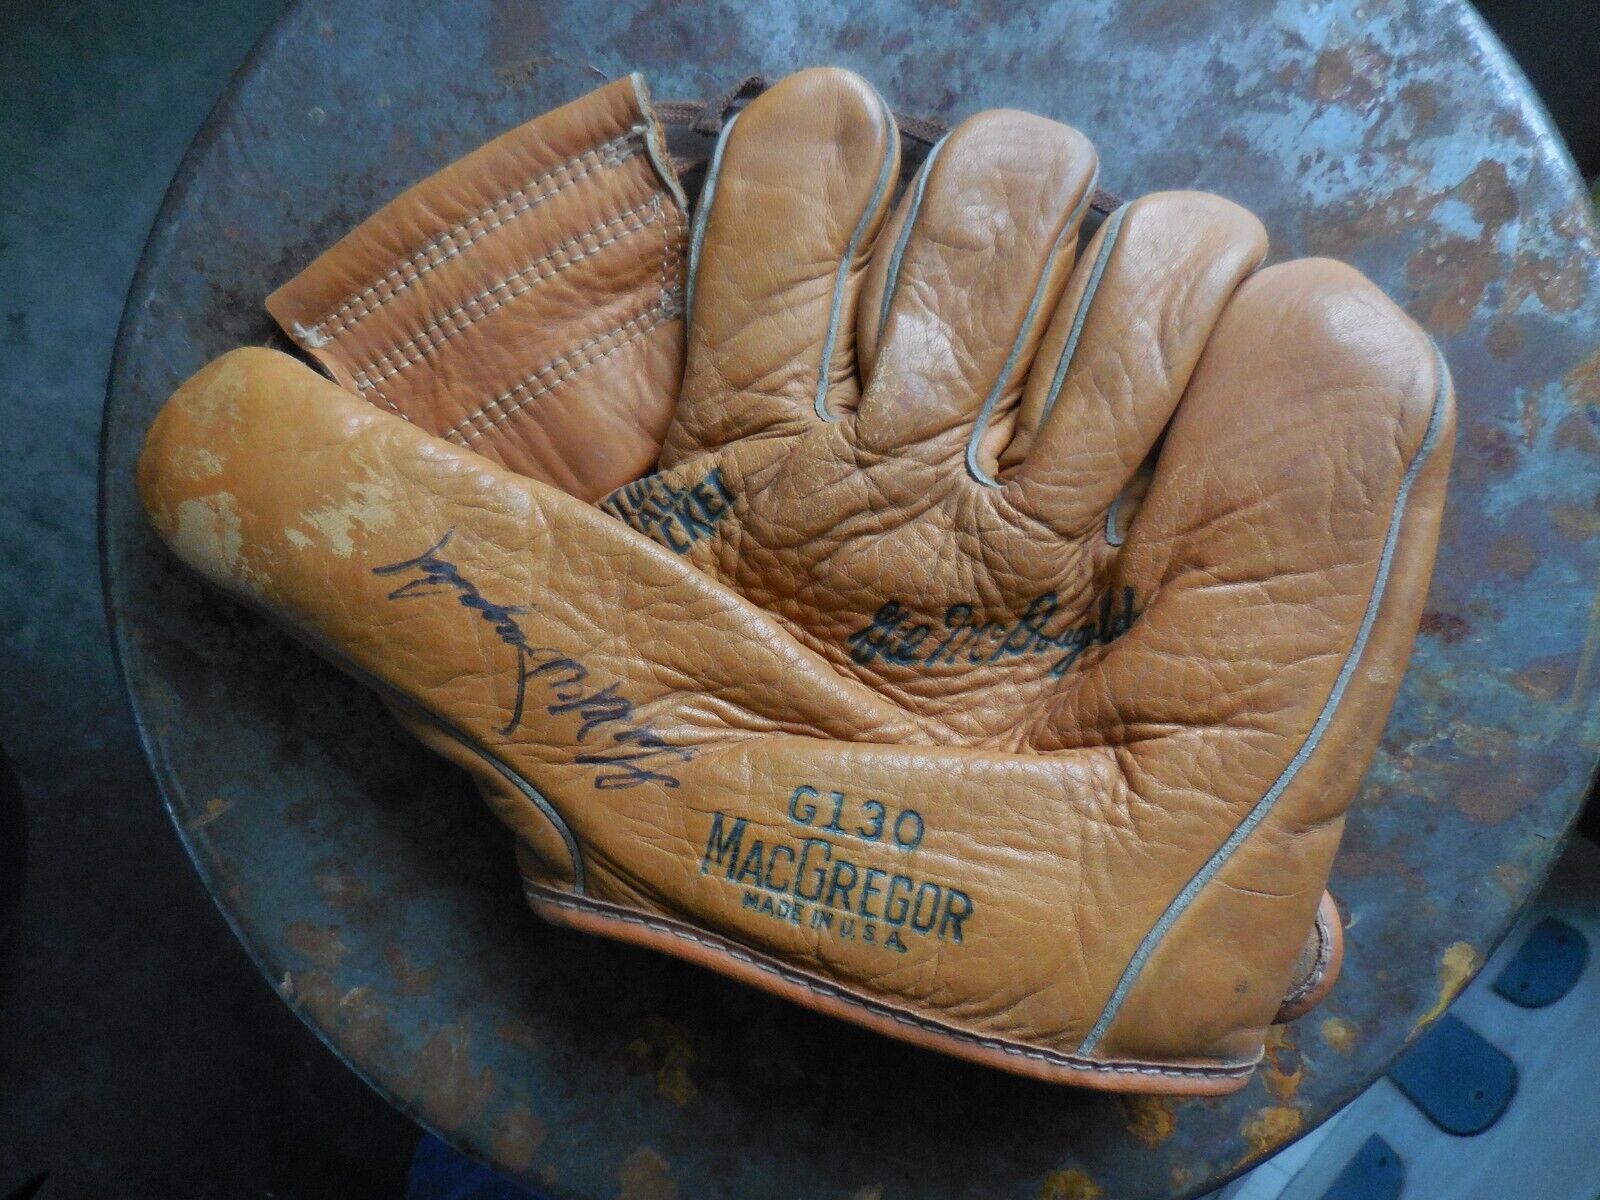 Autographed Glove Sale  Gil McDougald signed MacGregor G130, Yankees, All-Star